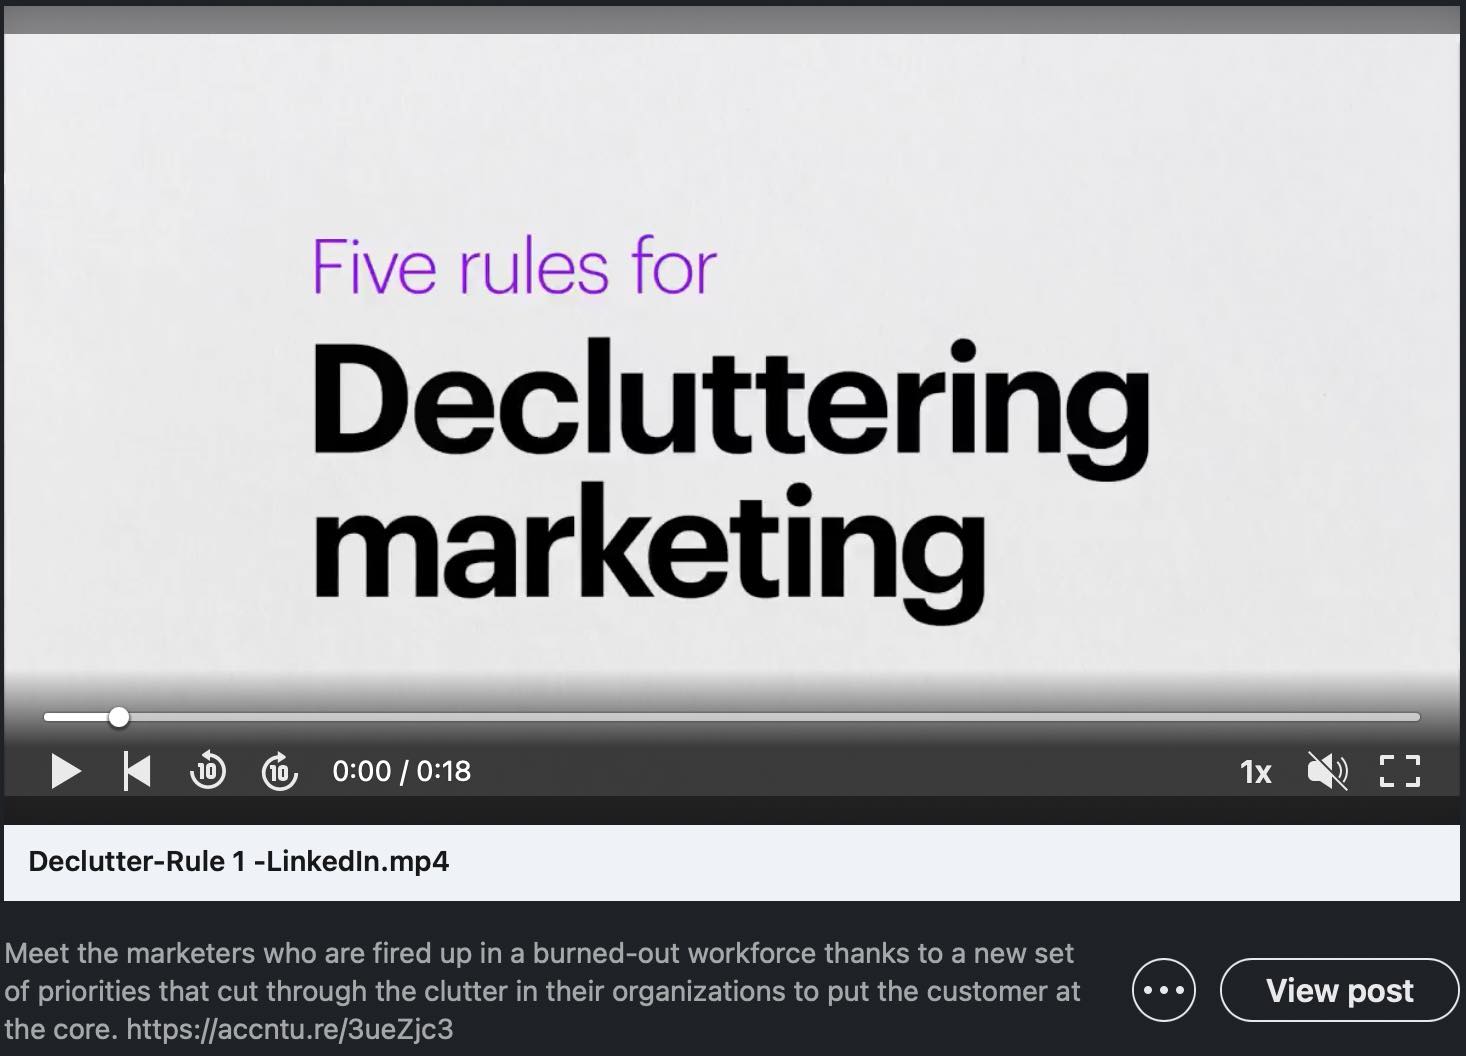 Screeshot from Accenture's LinkedIn page of a video titled "Five rules for Decluttering marketing."